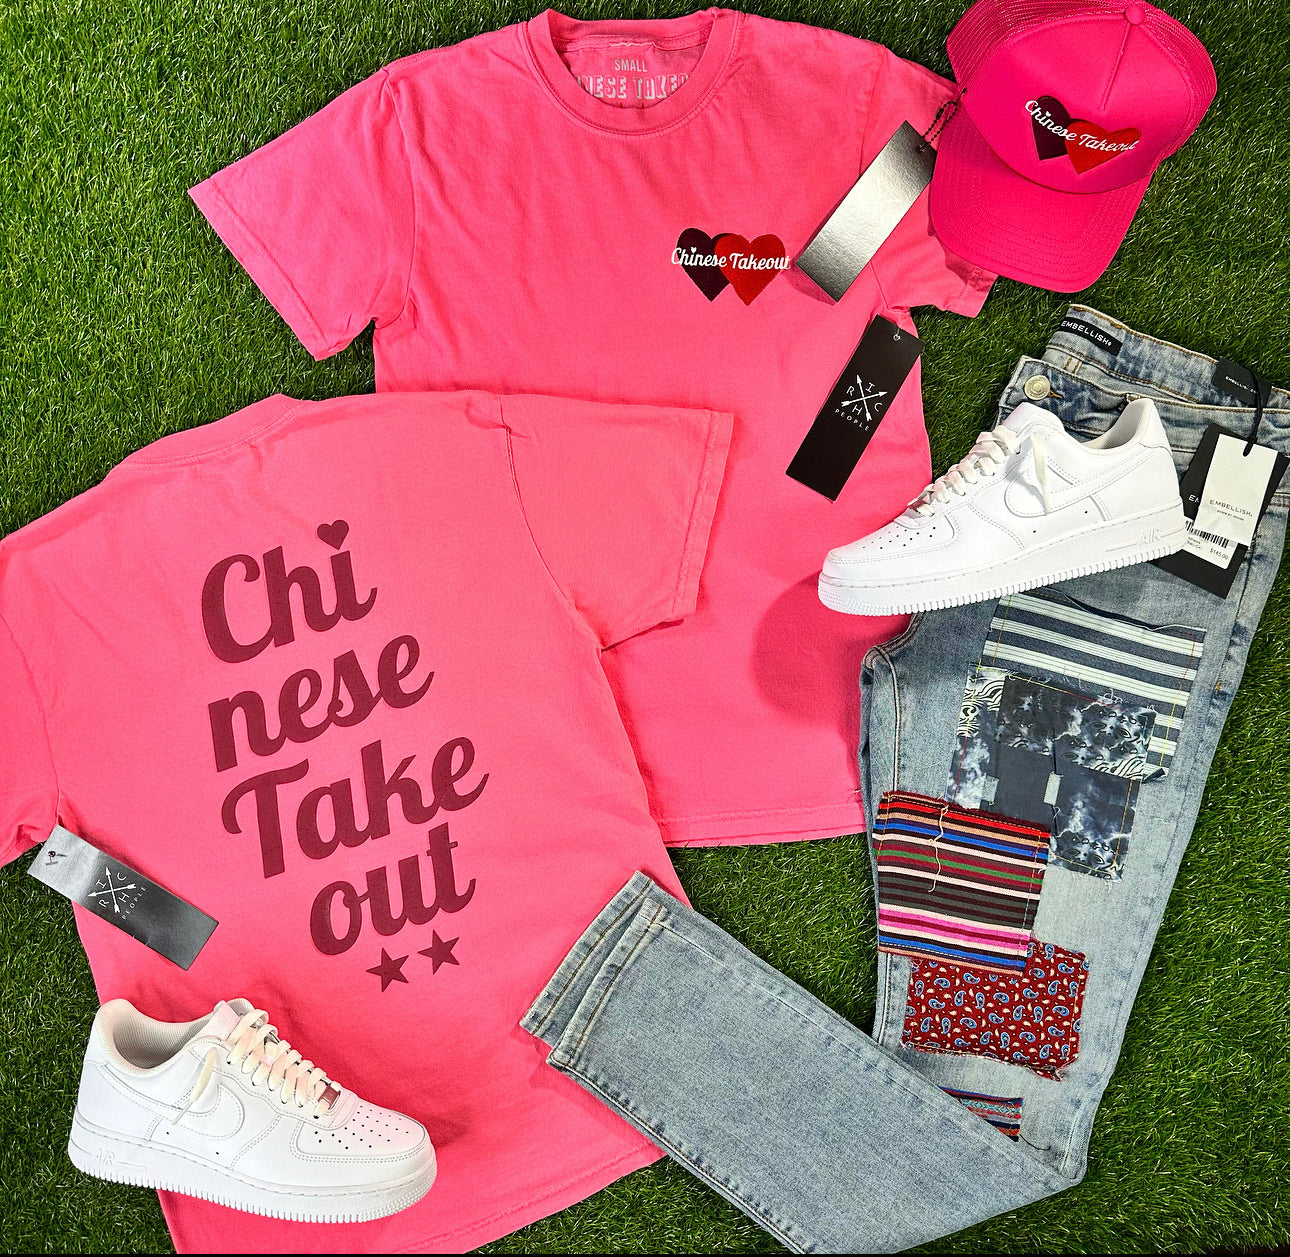 CTO,Pink Tee, Takeout, Men Tee, Boys Tee, Teen Tee, Valentines Day Apparel, Shirt to Match Valentines Day Dunks, WMNS, Graphic Tee, Urban Apparel,